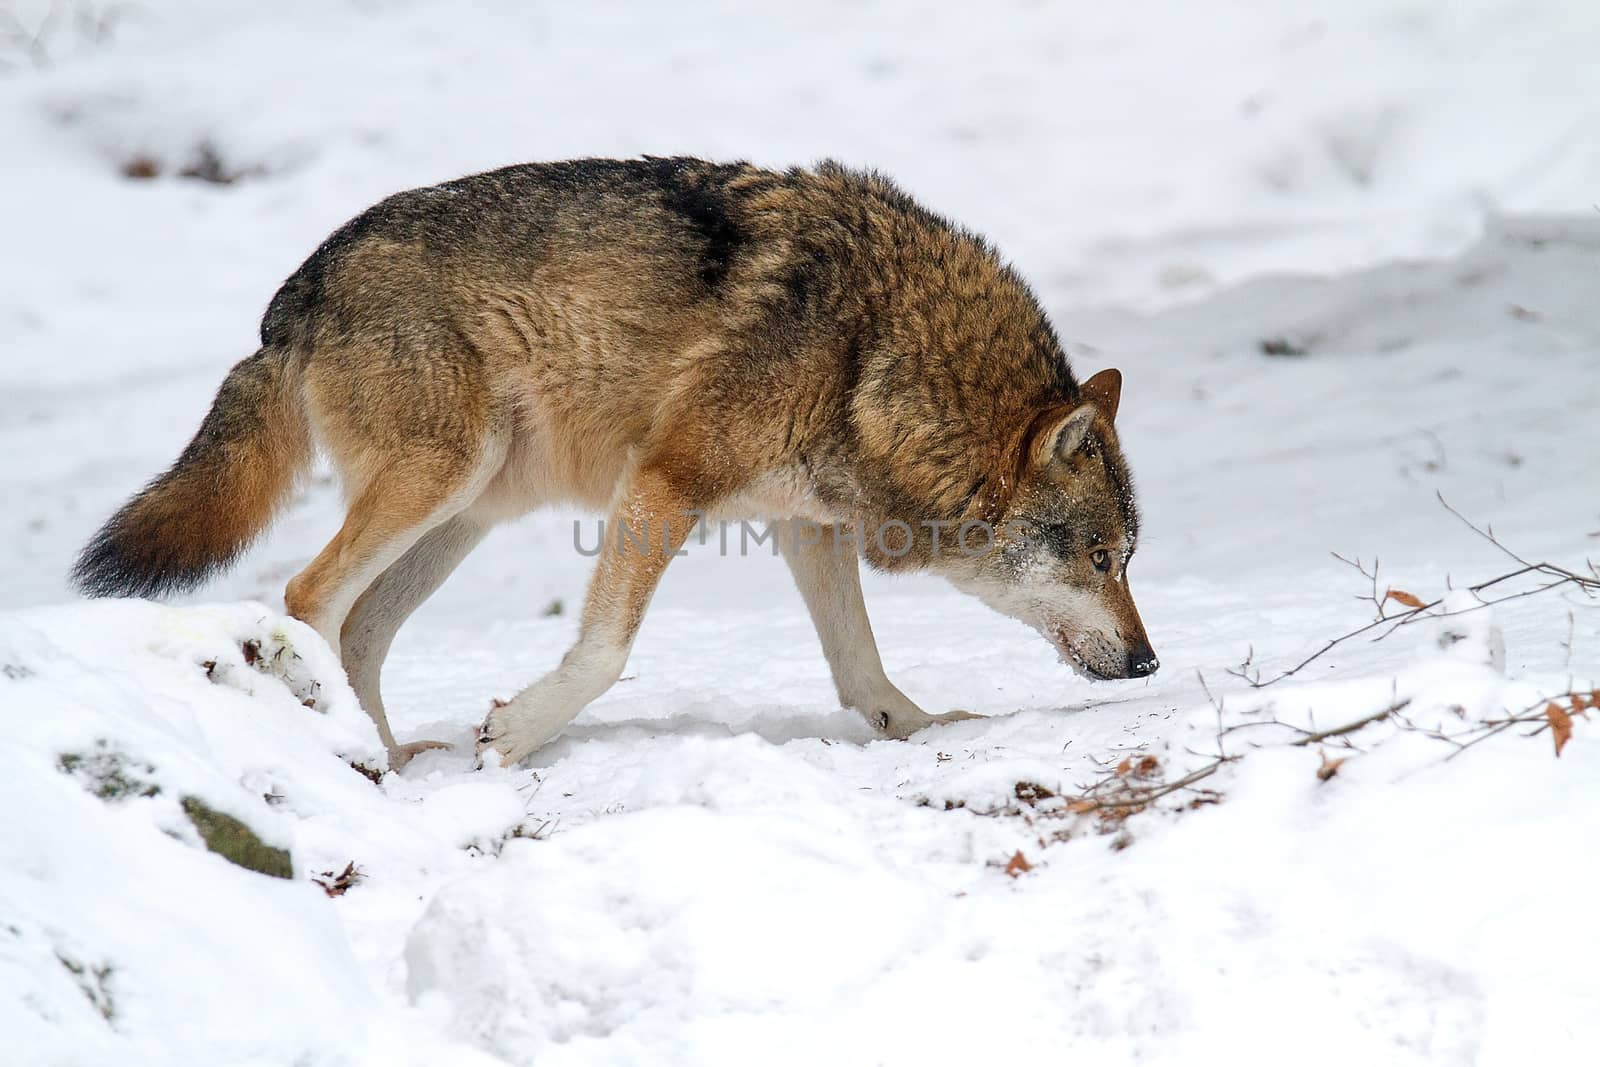 Gray wolf (Canis lupus) on the snow in the forest